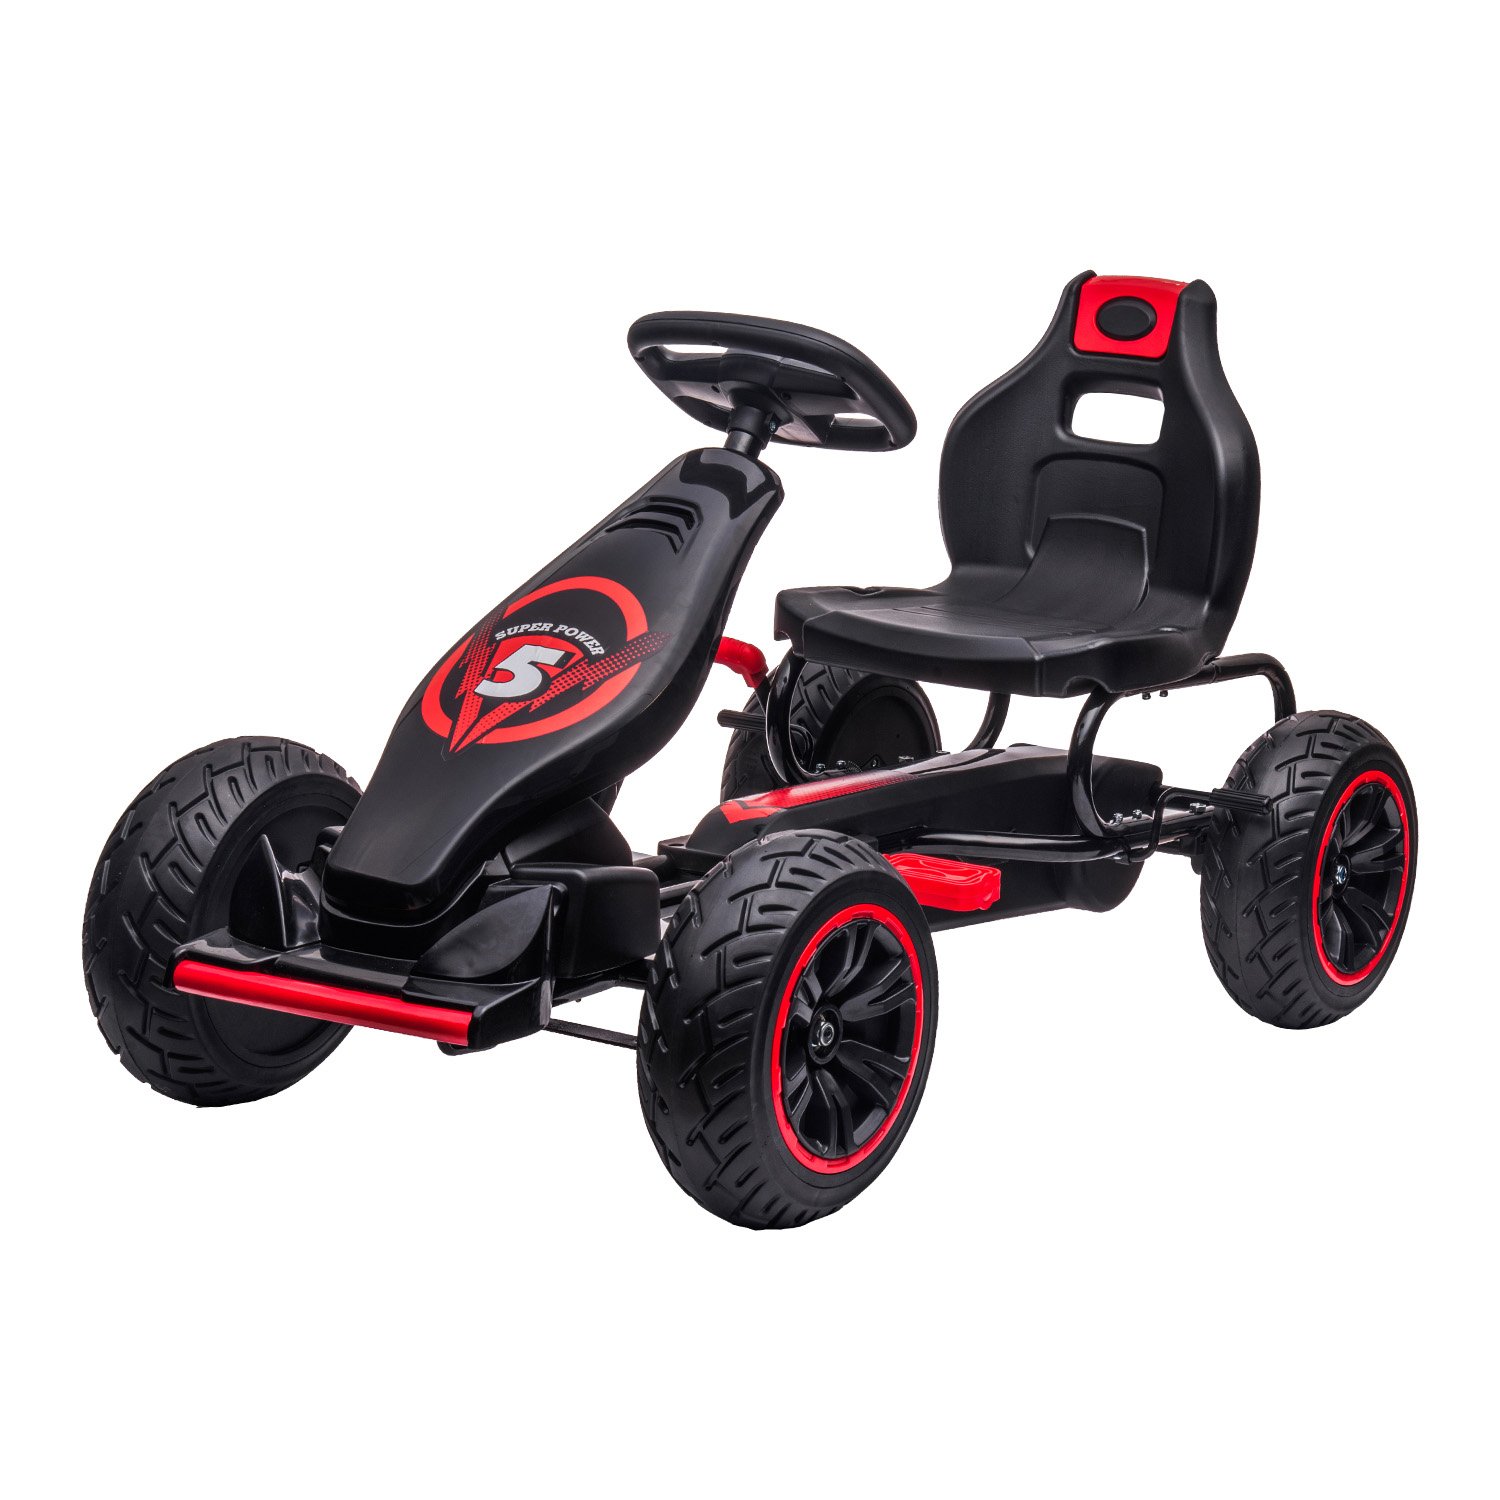 Kahuna G18 Kids Ride On Pedal Powered Go Kart Racing Style - Red 1